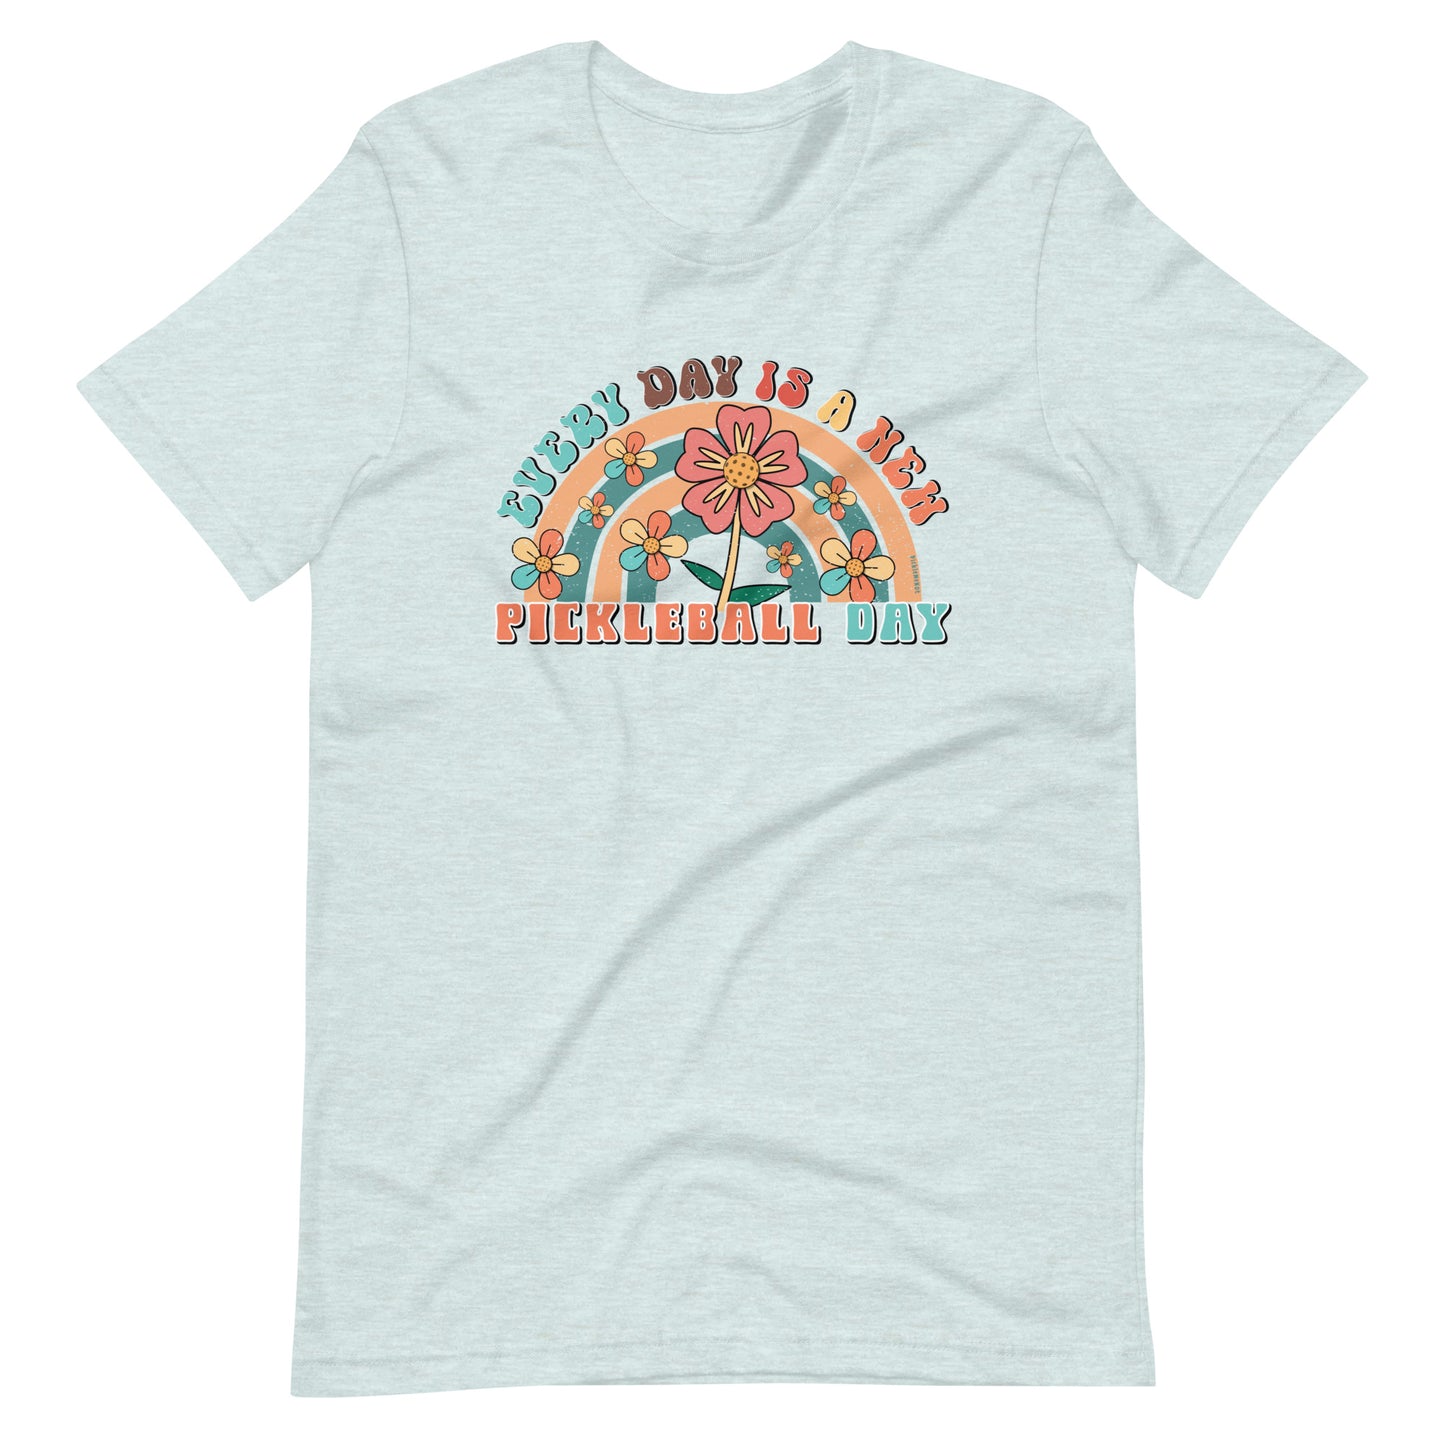 Fun Pickleball Rainbow Graphic: "Every Day Is A New Pickleball Day," Womens Unisex Heather Prism Ice Blue T-Shirt